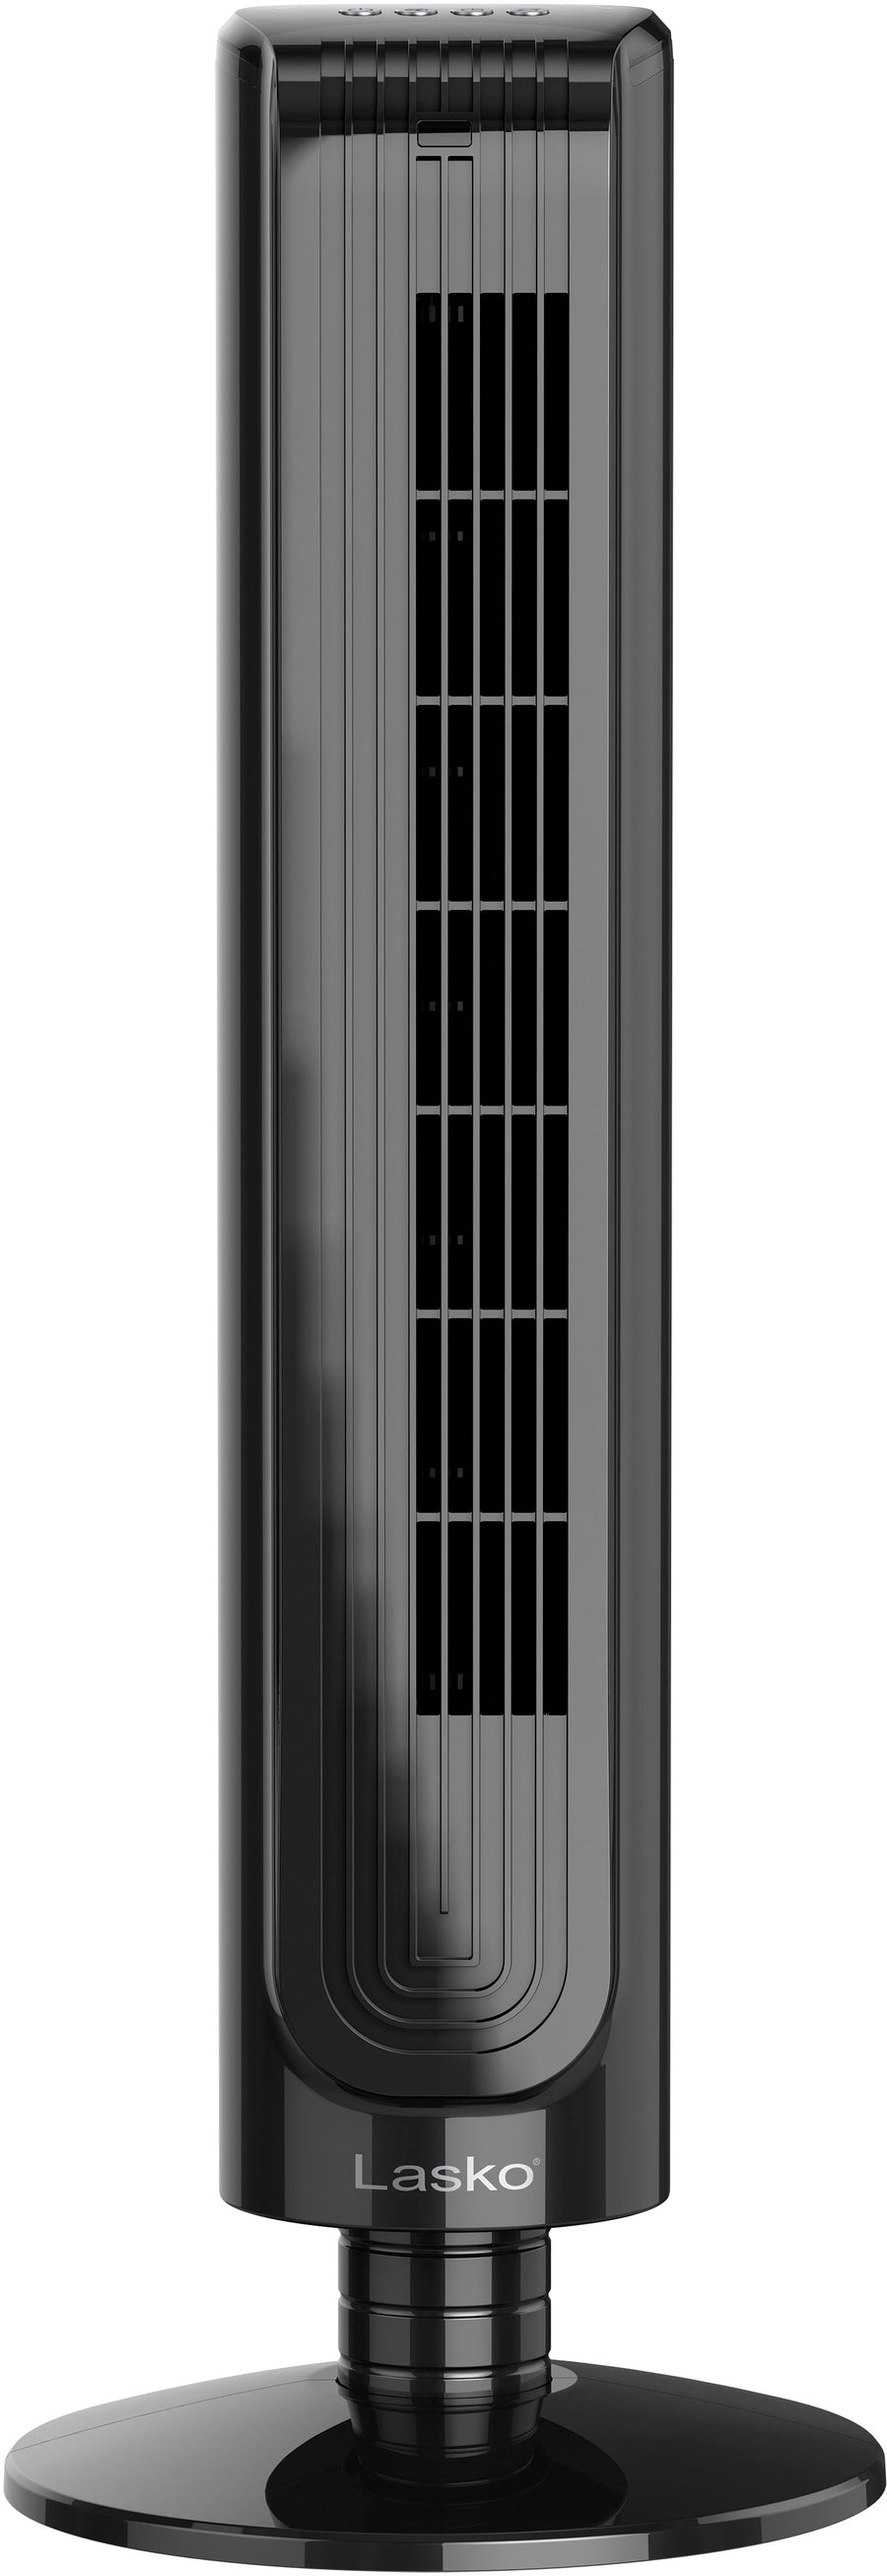 Lasko 3-Speed Oscillating Tower Fan with Timer and Remote Control - Black_0